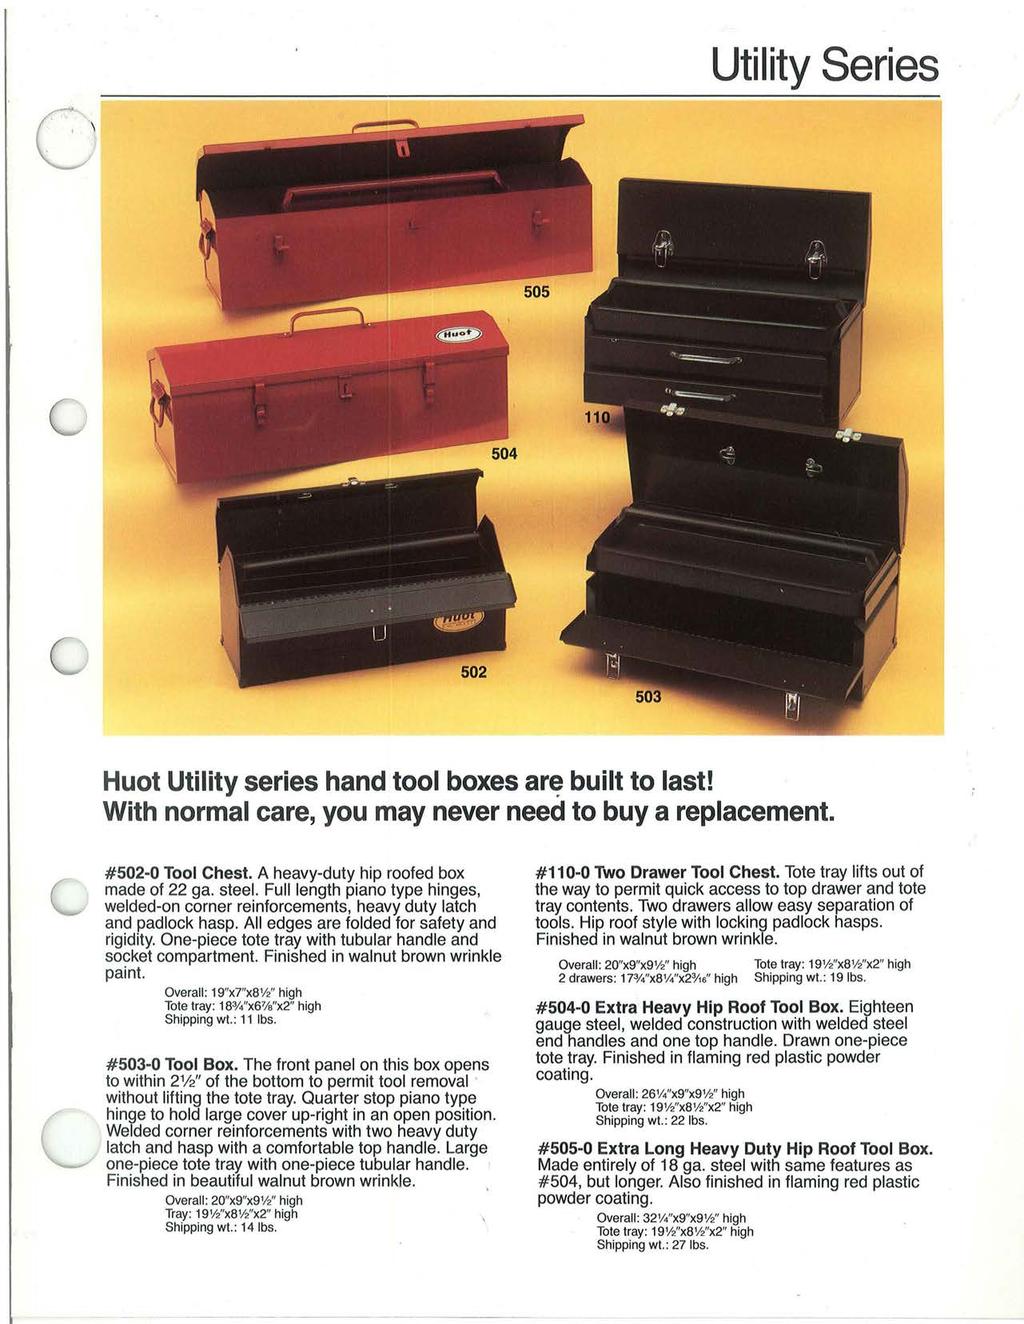 c Utility Series Huot Utility series hand tool boxes ar~ built to last! With normal care, you may never need to buy a replacement. #502-0 Tool Chest. A heavy-duty hip roofed box made of 22 ga. steel.